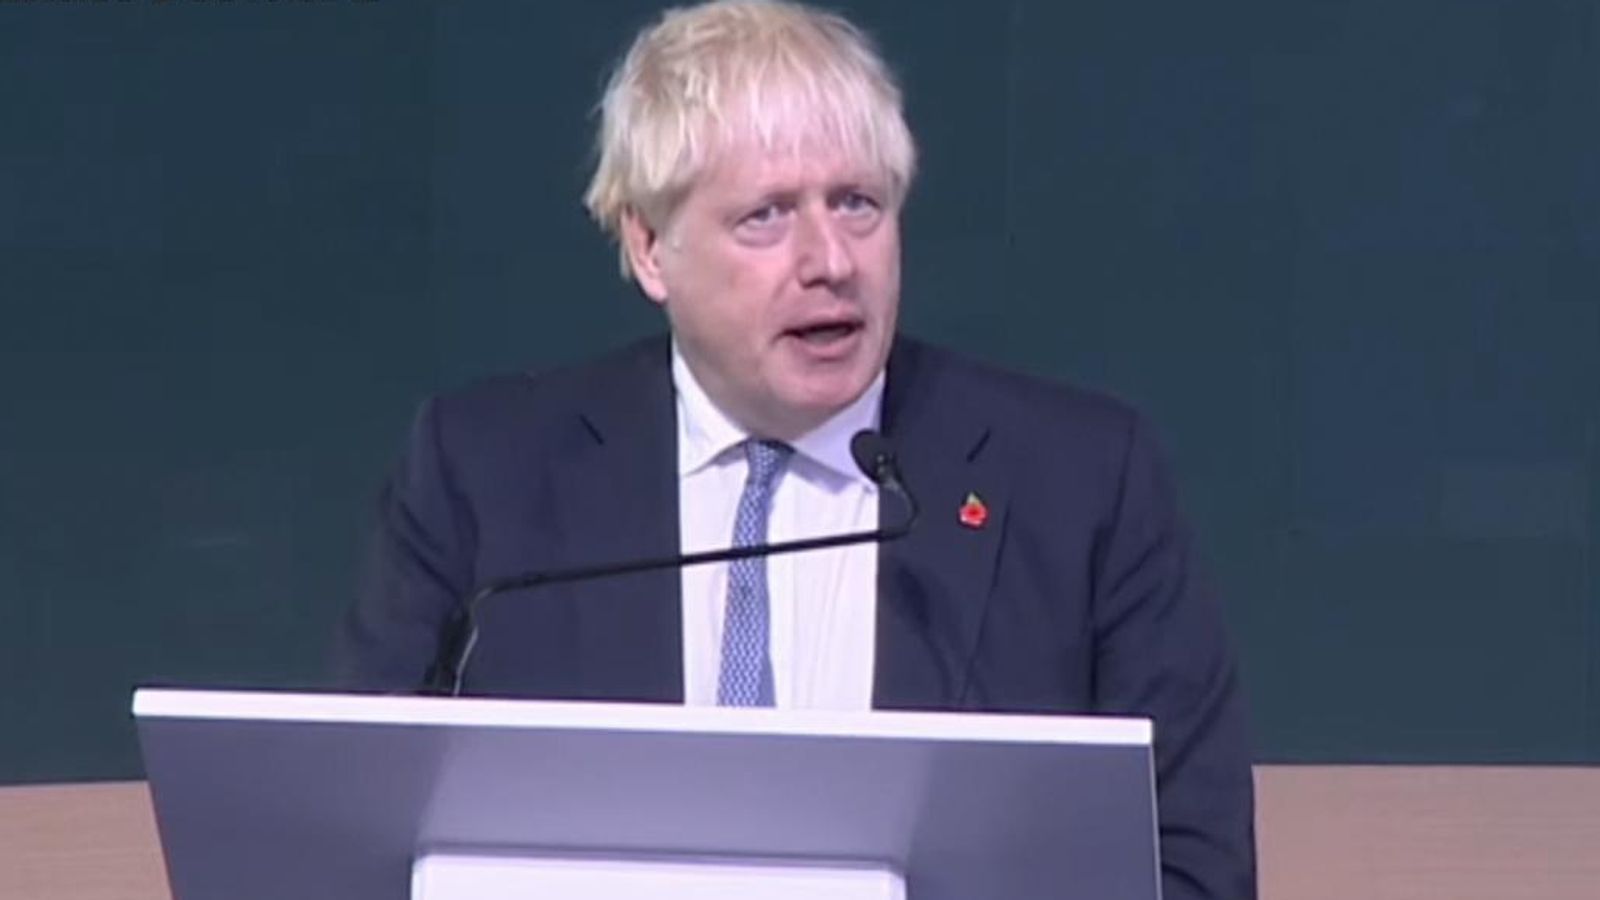 Former PM Boris Johnson criticises net zero 'naysayers' who want to 'frack the hell out of the British countryside' in appearance at COP27